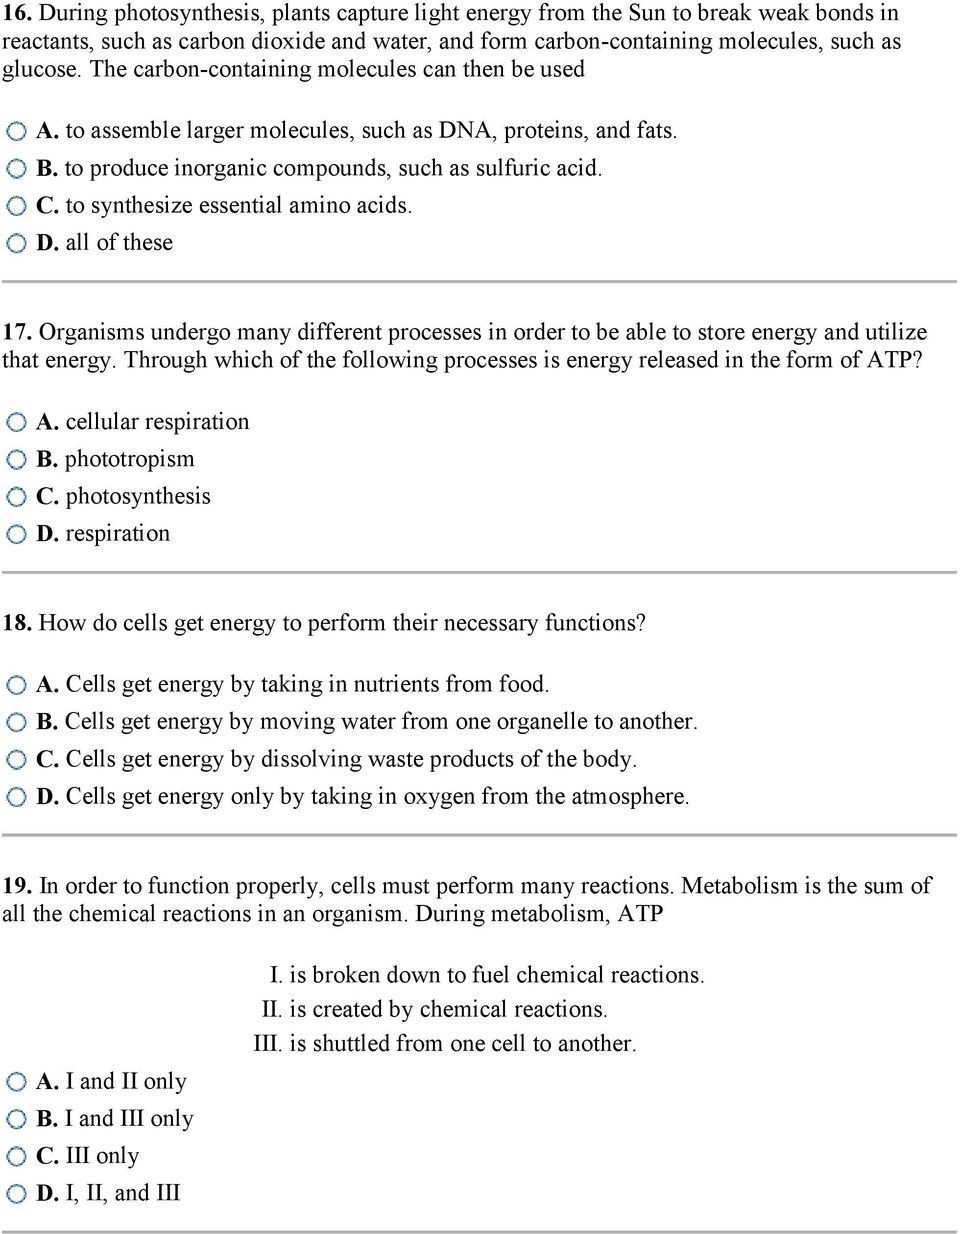 Genetics And Biotechnology Chapter 13 Worksheet Answers